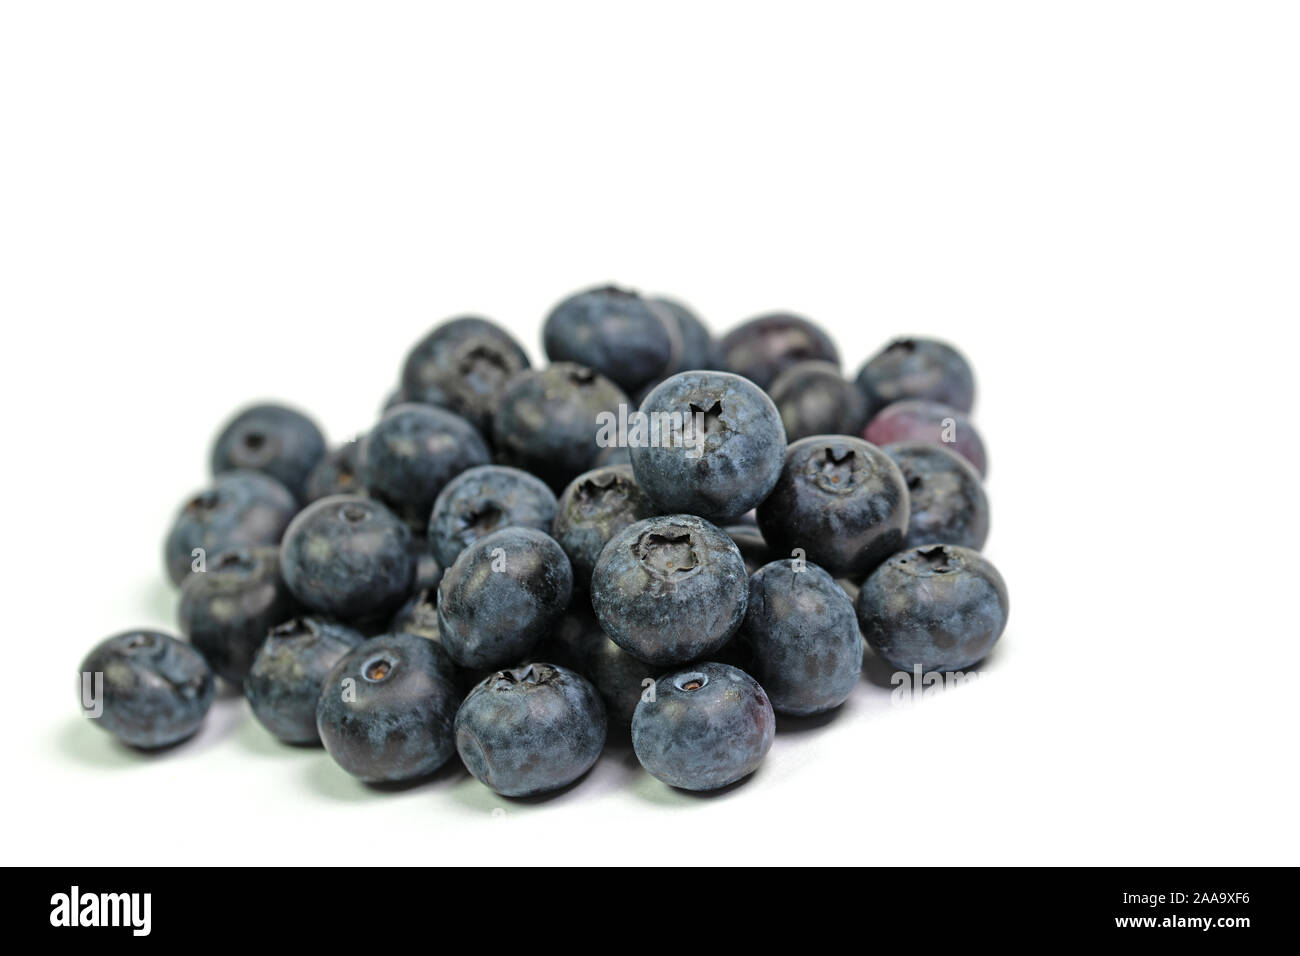 Blueberries in front of white background Stock Photo